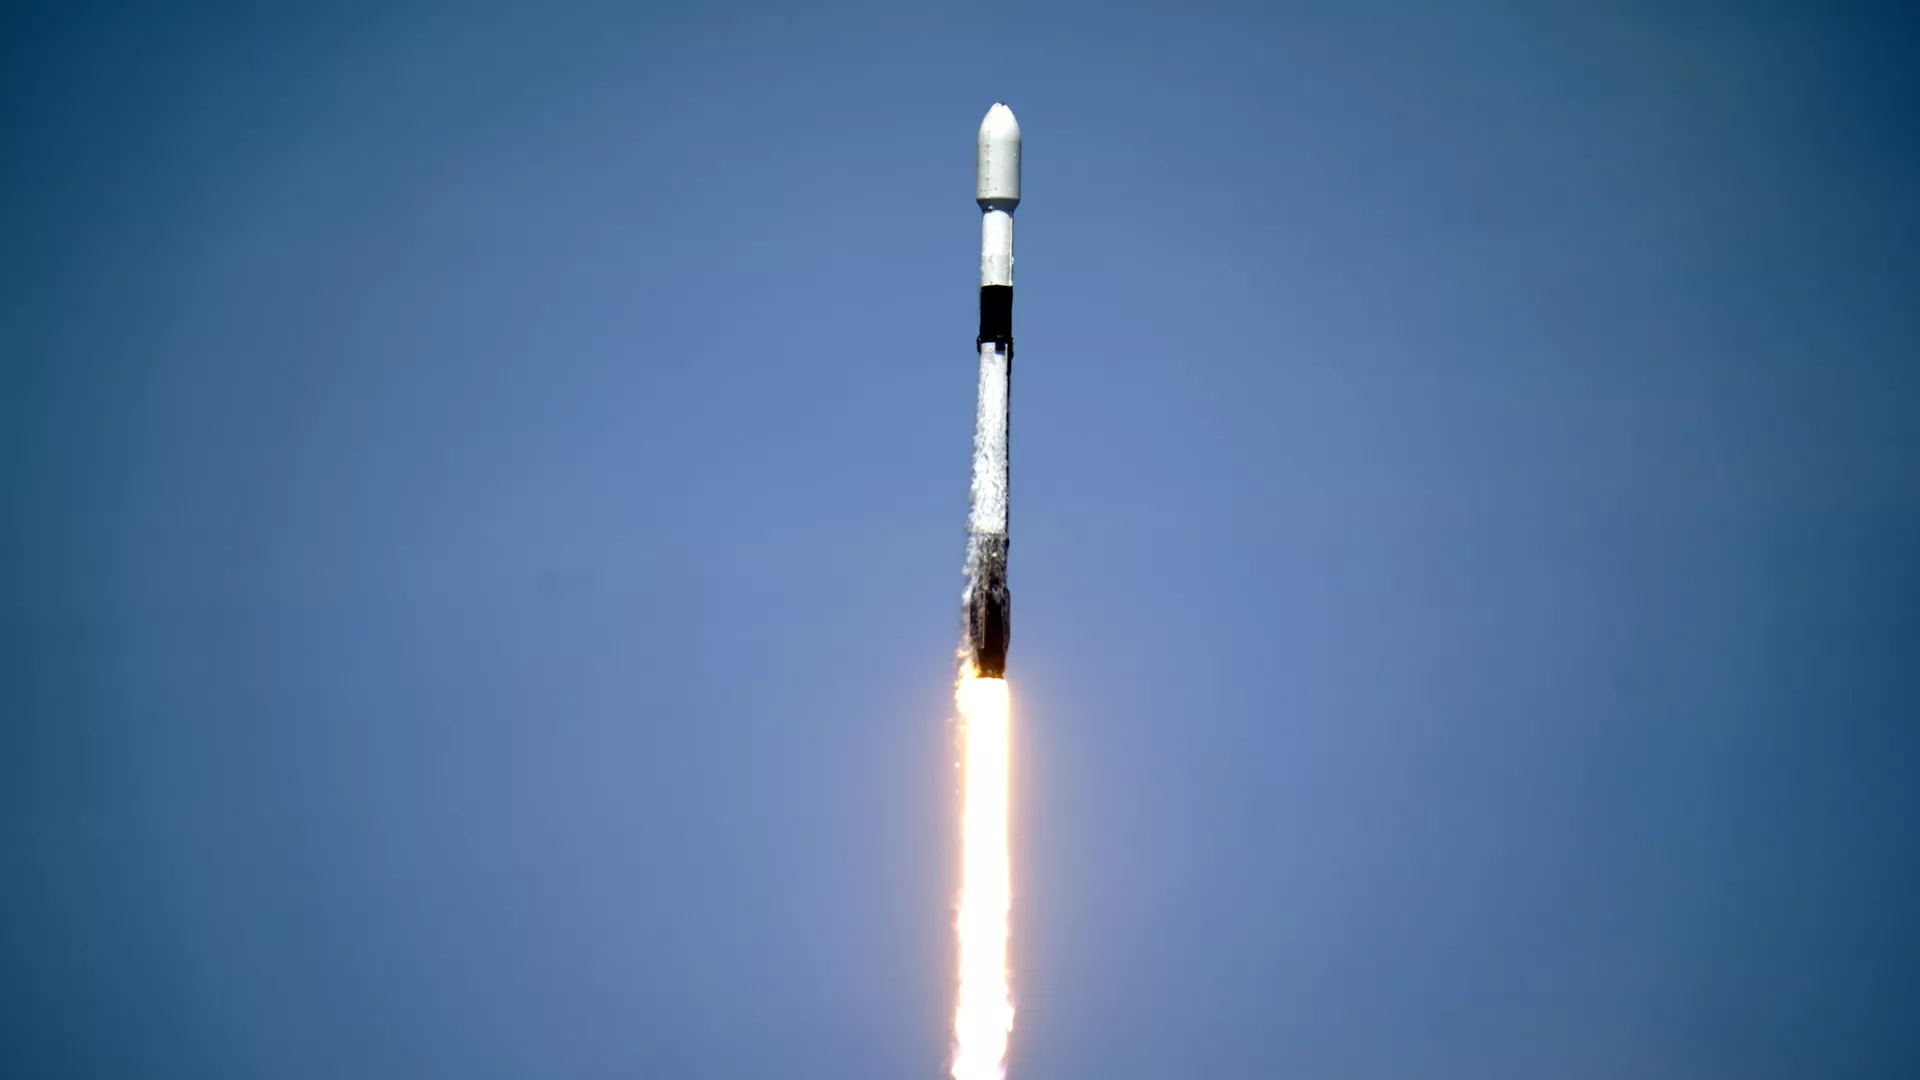 A SpaceX Falcon 9 rocket with the 26th batch of approximately 60 satellites for SpaceX's Starlink broadband network lifts off from pad 39A at the Kennedy Space Center in Cape Canaveral, Fla., Tuesday, May 4, 2021. - Sputnik International, 1920, 01.12.2023